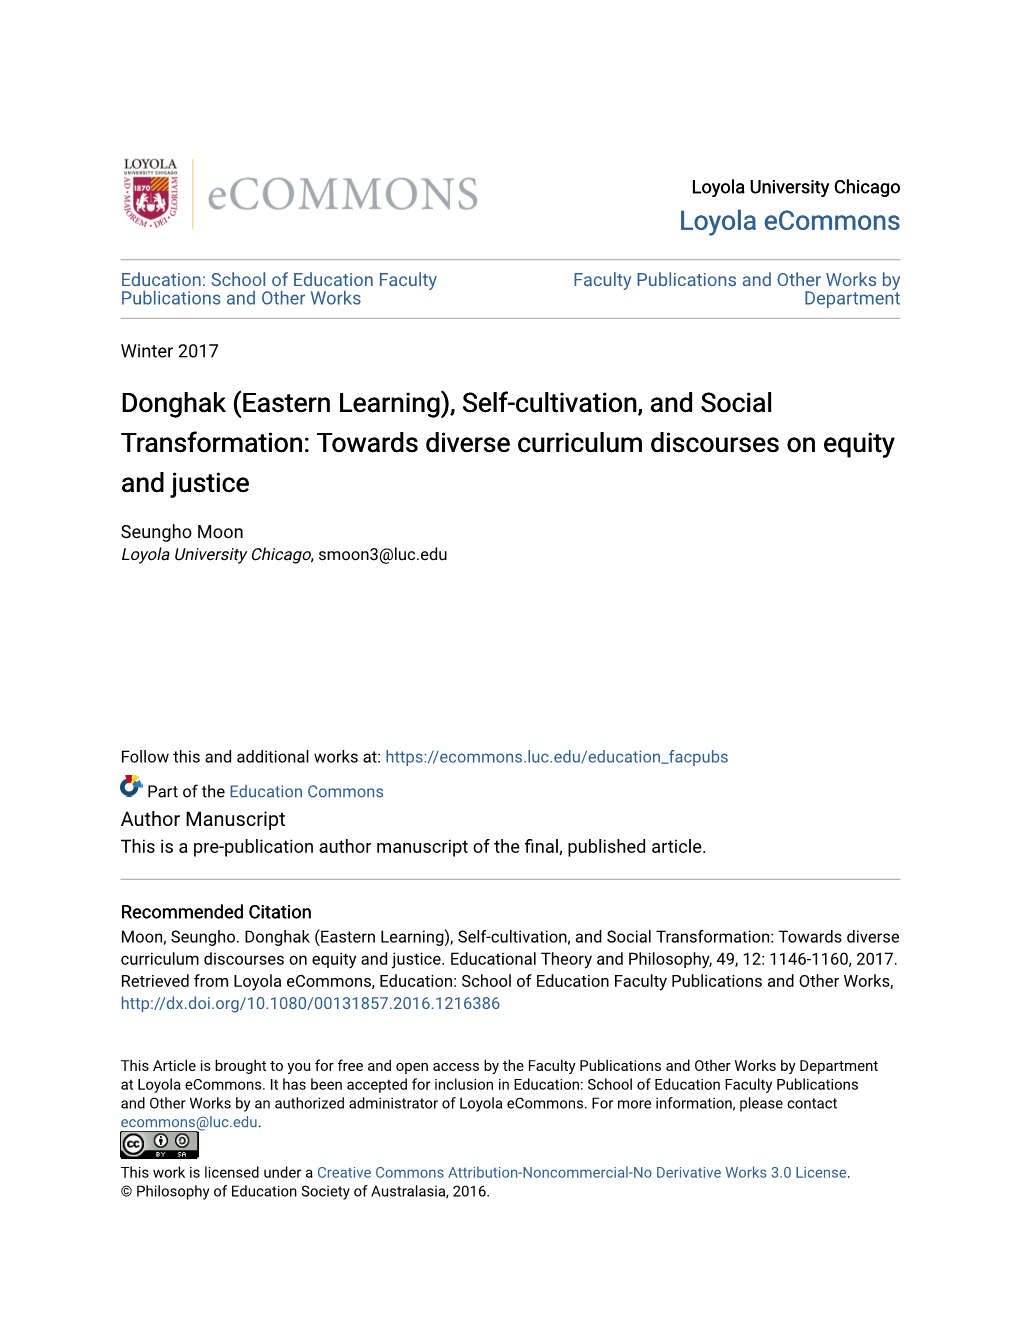 Donghak (Eastern Learning), Self-Cultivation, and Social Transformation: Towards Diverse Curriculum Discourses on Equity and Justice